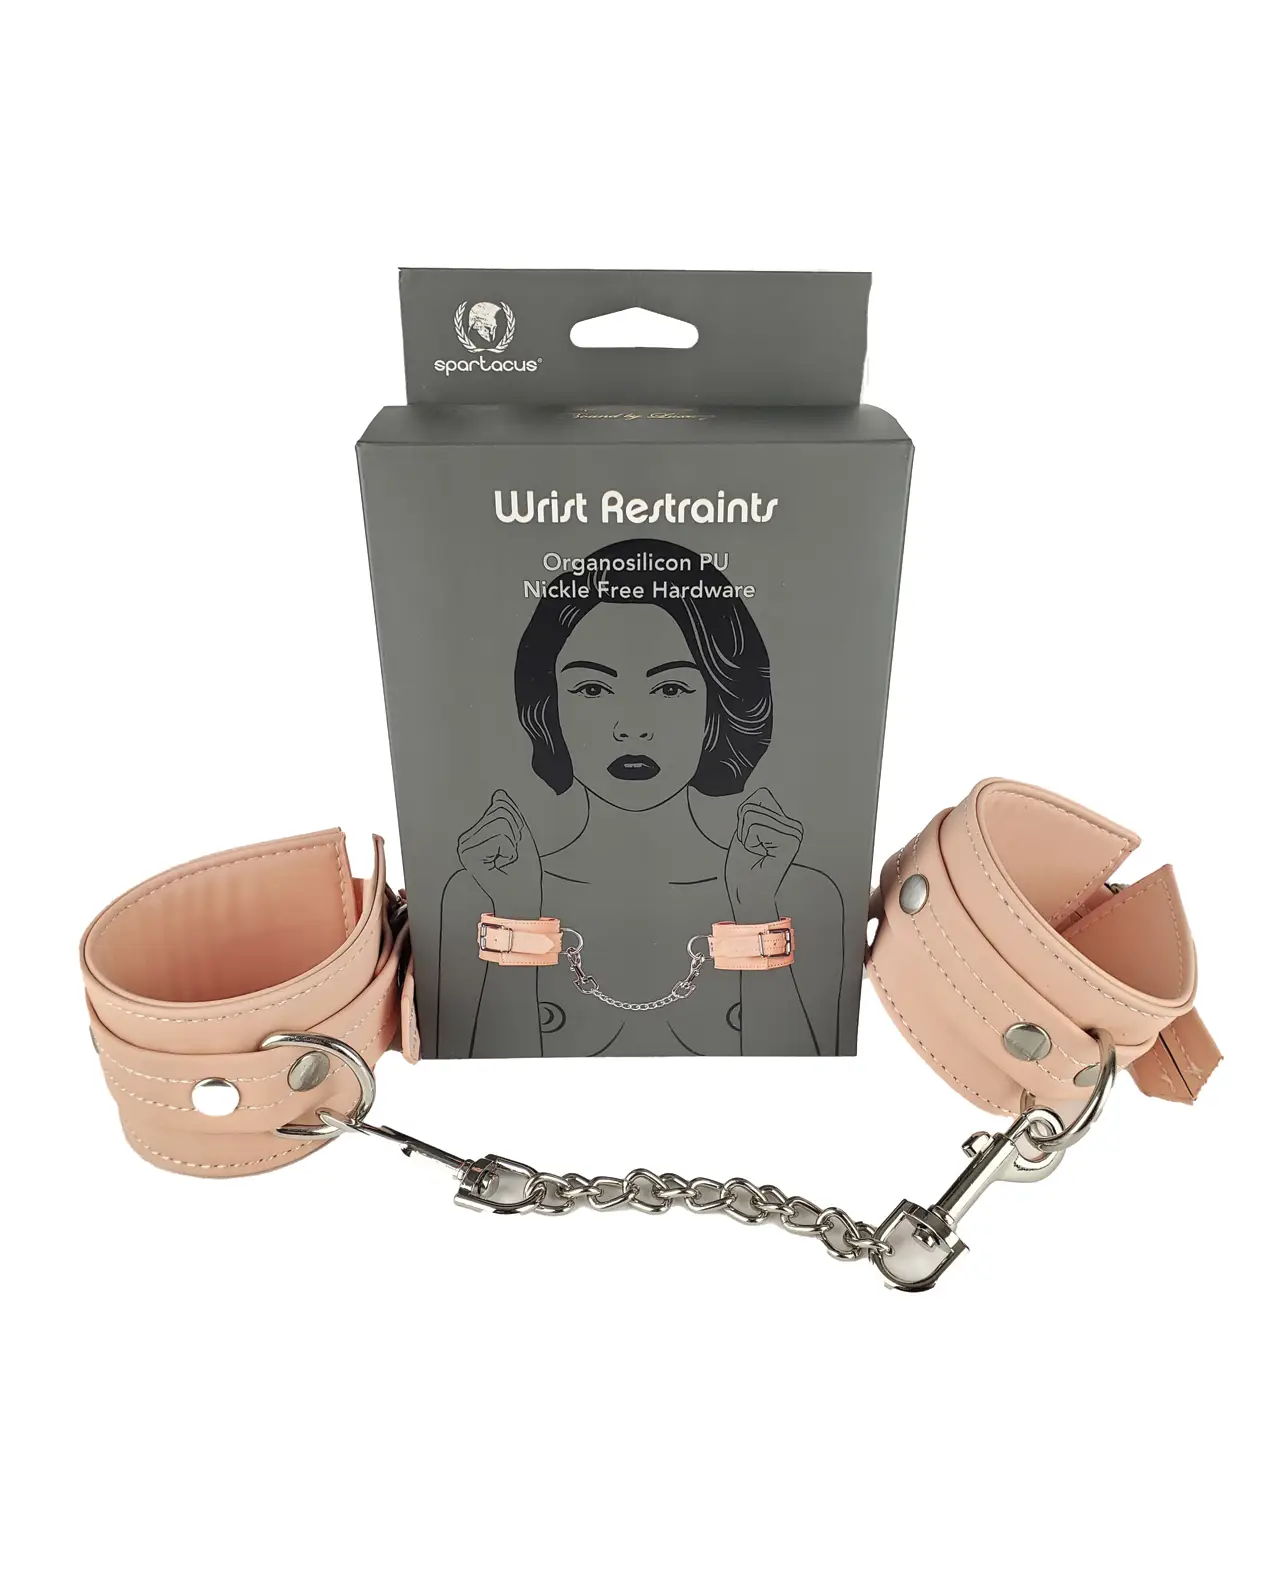 The image is a cartoon woman wearing the wrist cuffs on her wrist. The actual cuffs in pink sit in front of the box.